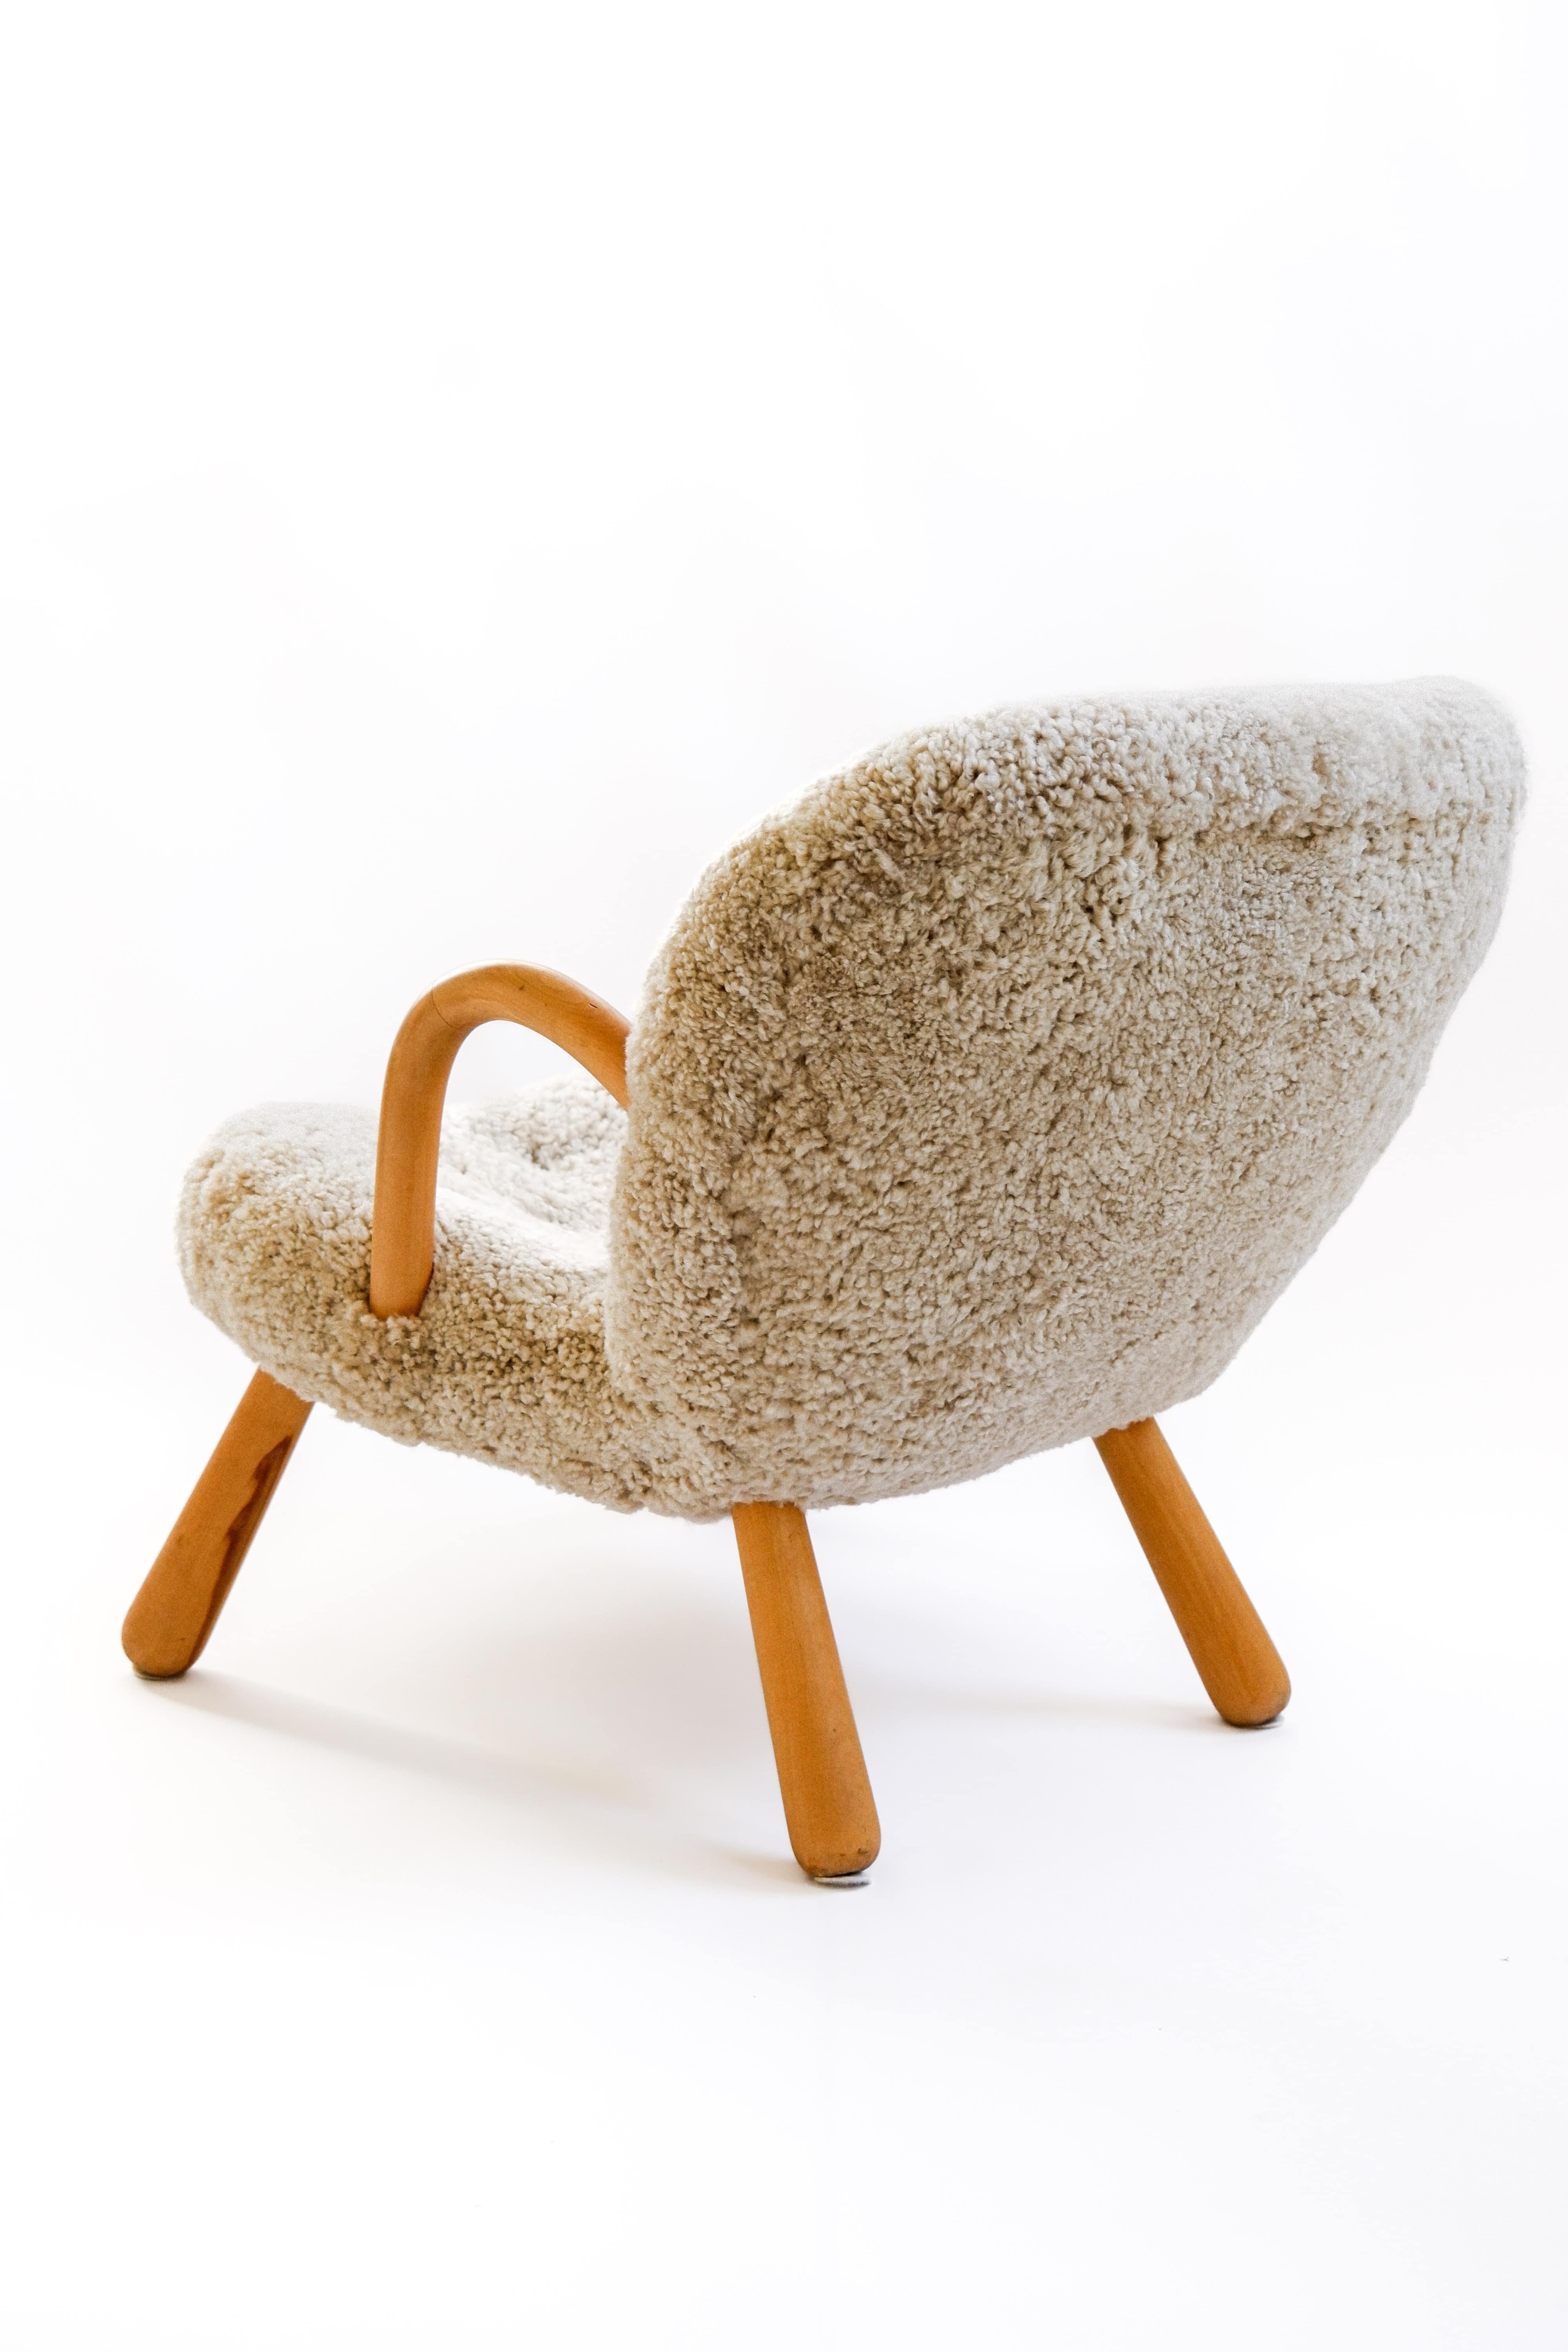 Iconic Clam chair designed by Arnold Madsen for Madsen & Schubell in Denmark in 1944. This example is a vintage original armchair produced in the 40's in danemark. The chair has been reupholstered in premium Sheepskin from New Zeland. The arm chairs